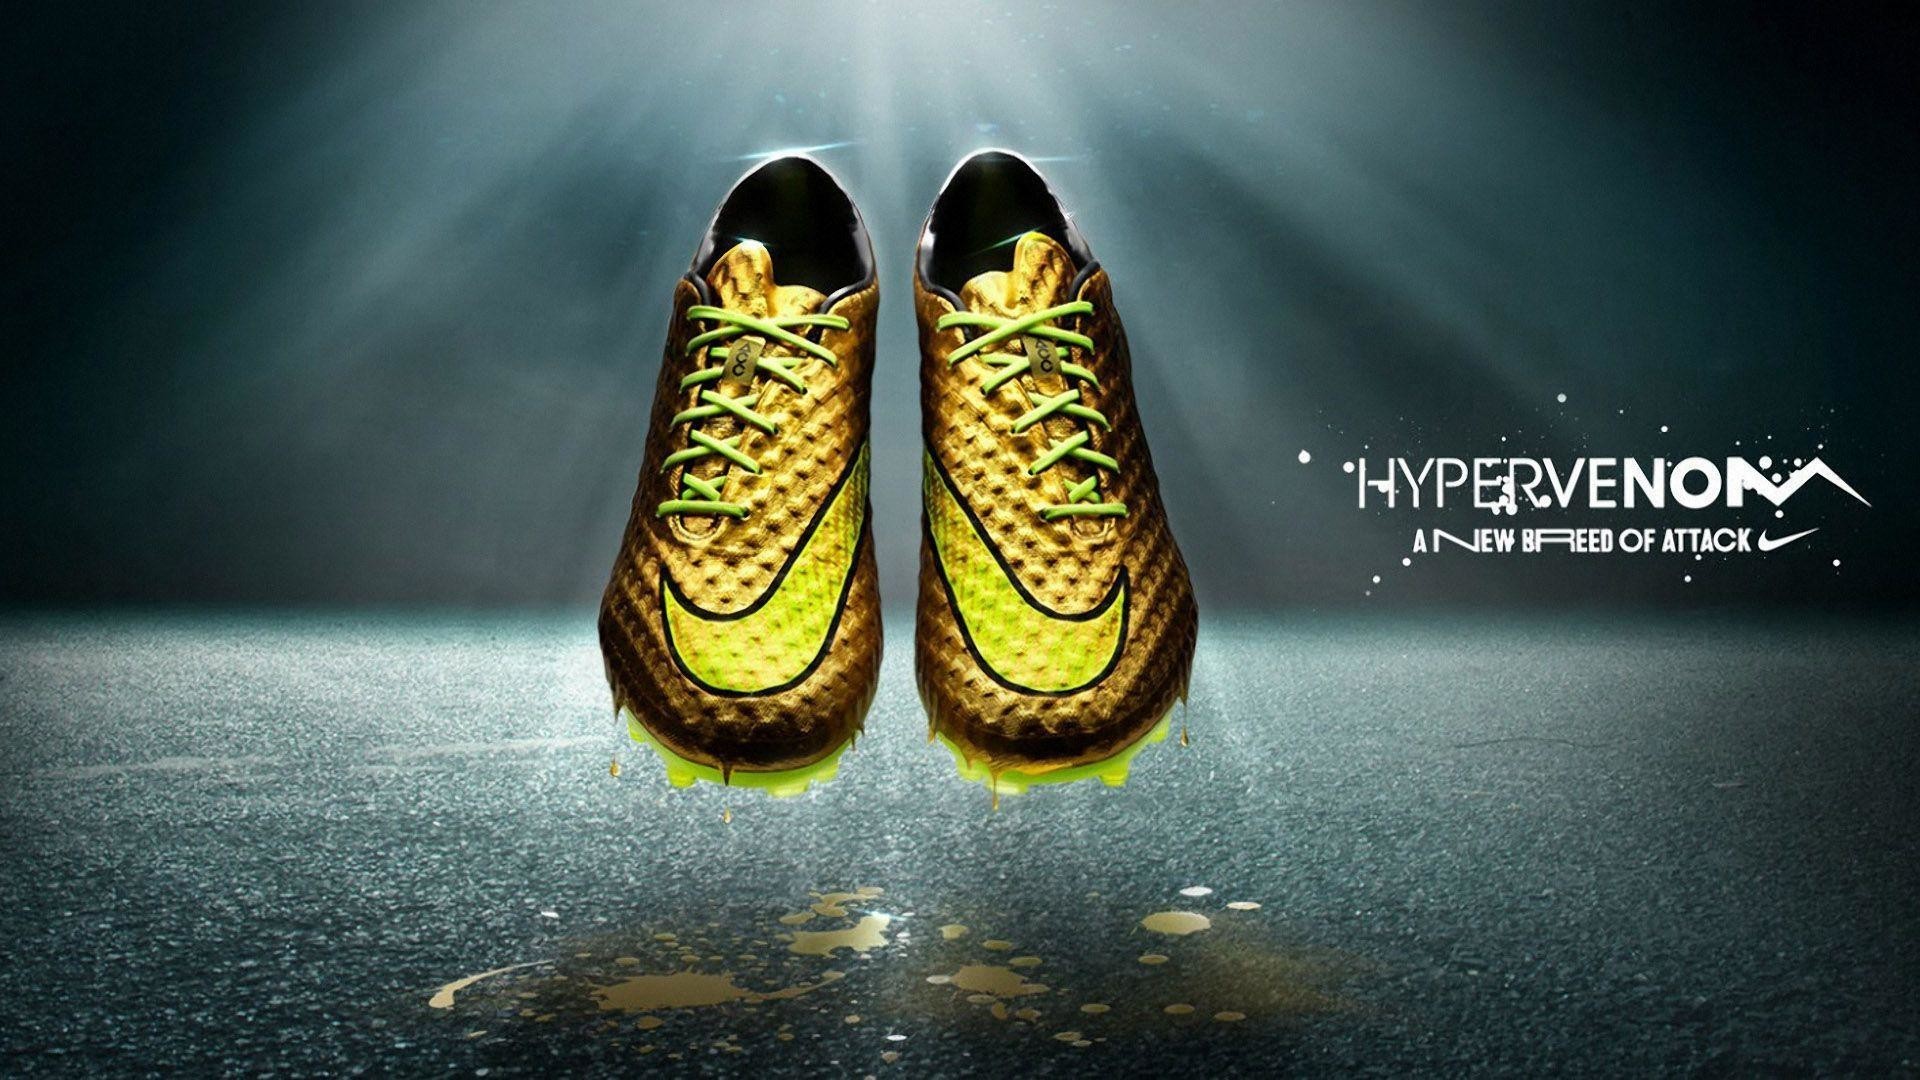 1920x1080  Nike Football Laser 2015 Wallpapers - Wallpaper Cave